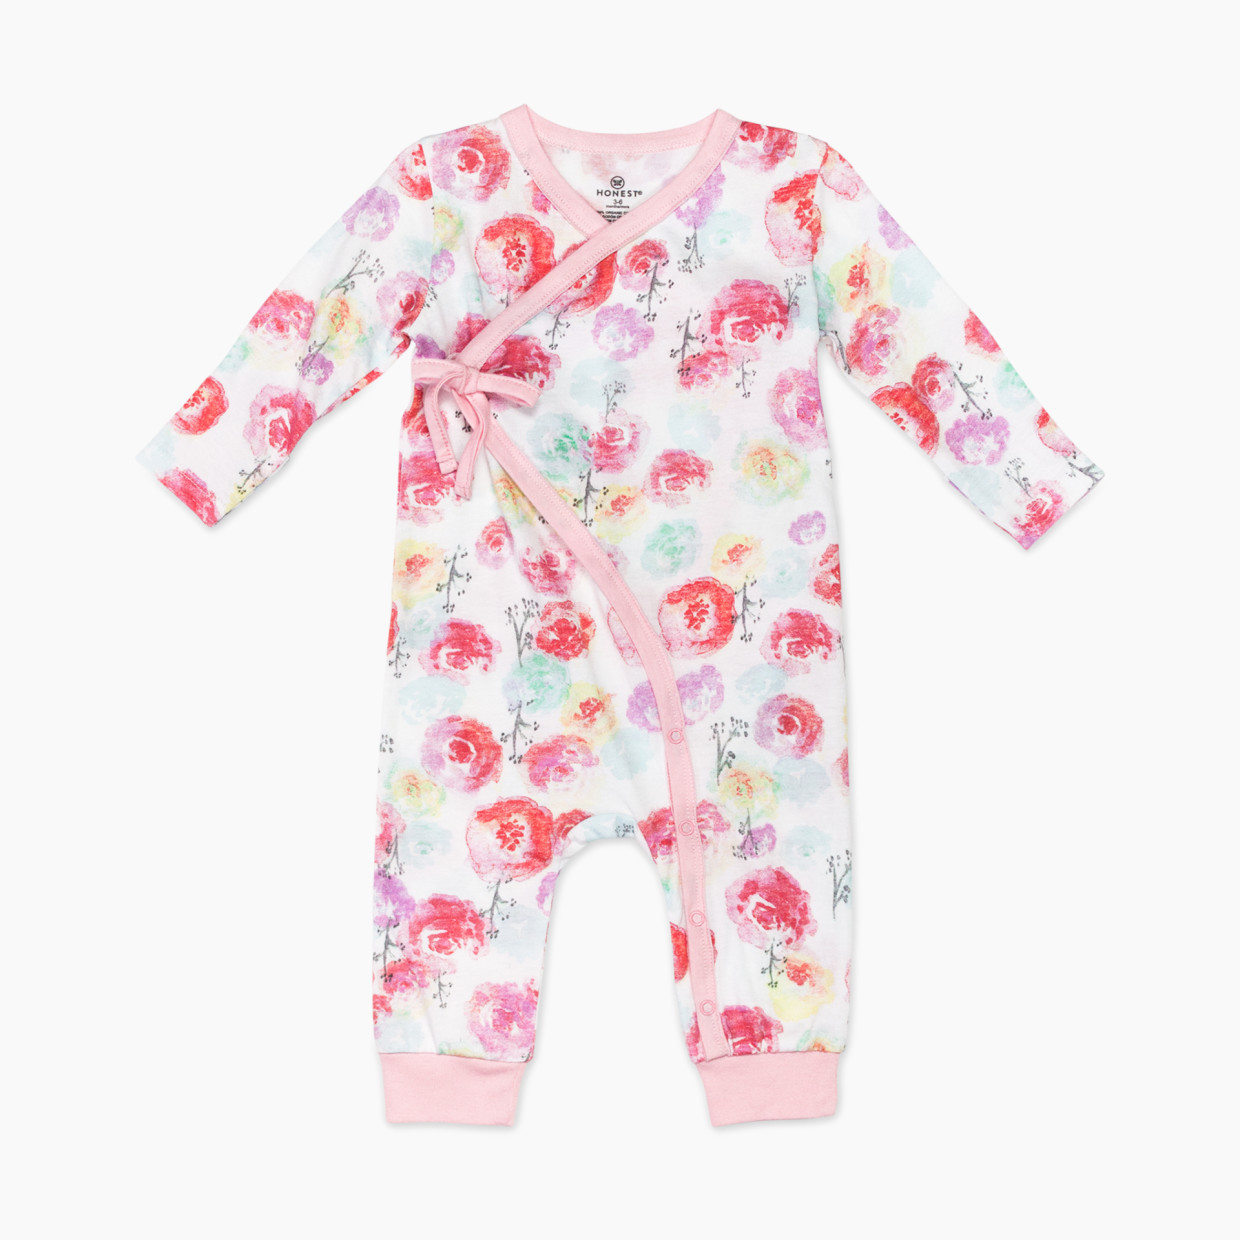 Honest Baby Clothing Organic Cotton Side Tie Coverall - Rose Blossom, 0 ...